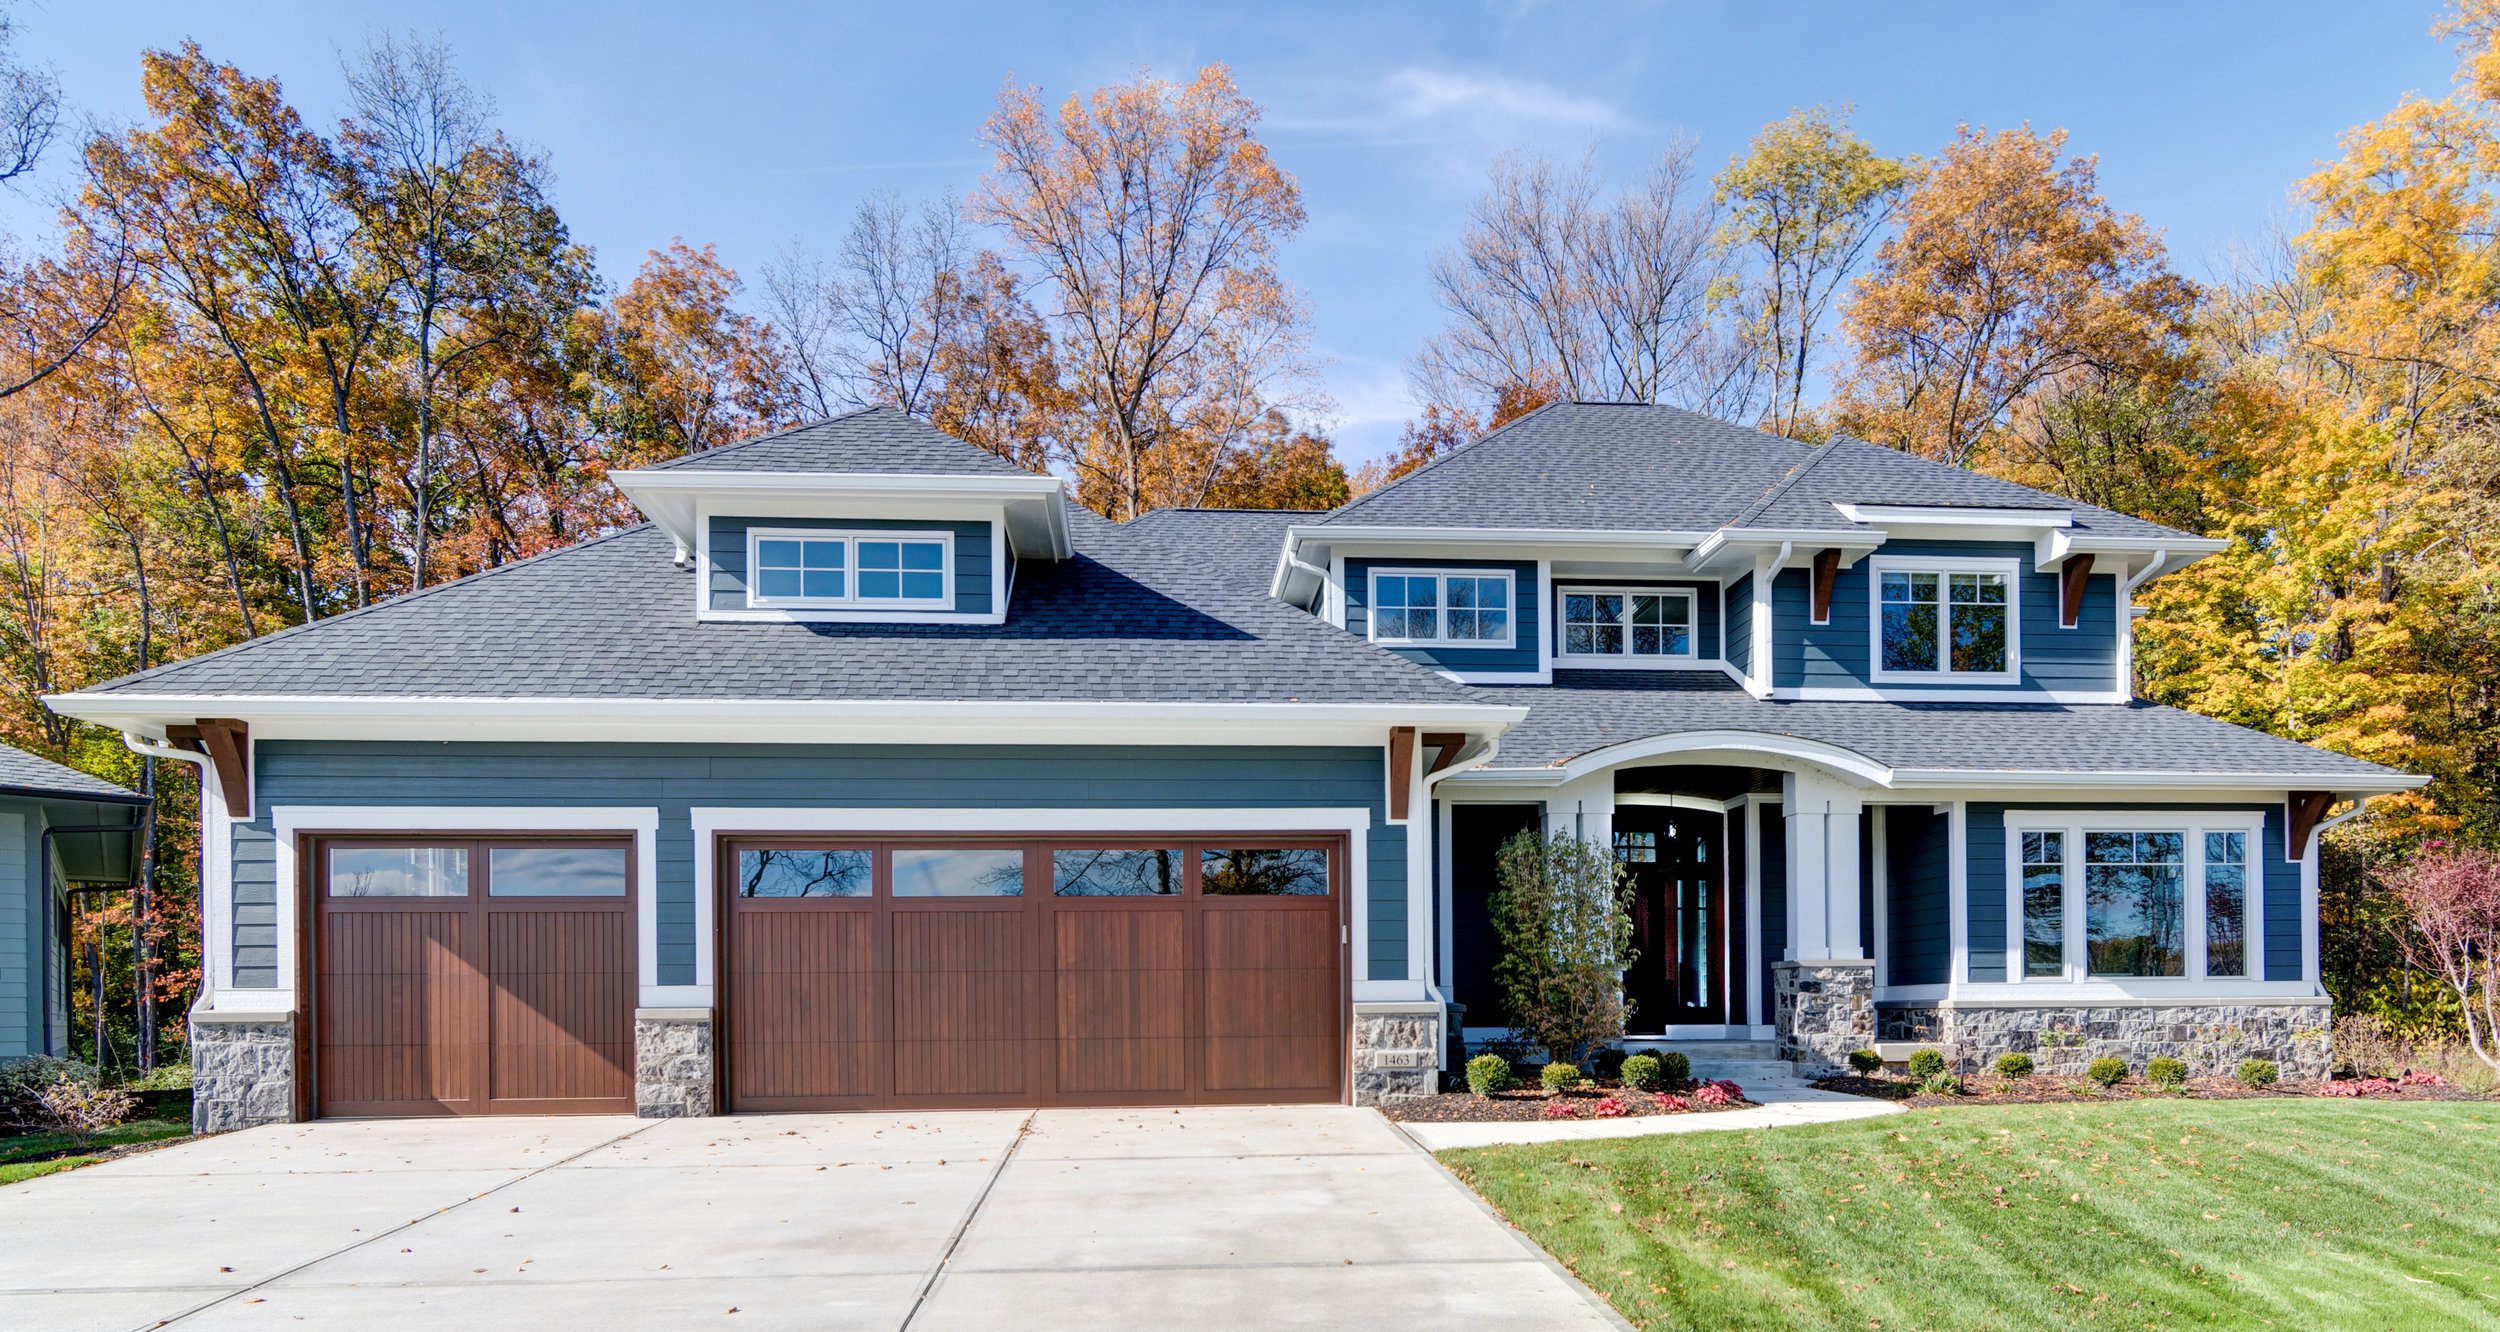 A custom home with a stunning blue garage door, built by a leading custom home builder in Carmel and Westfield.